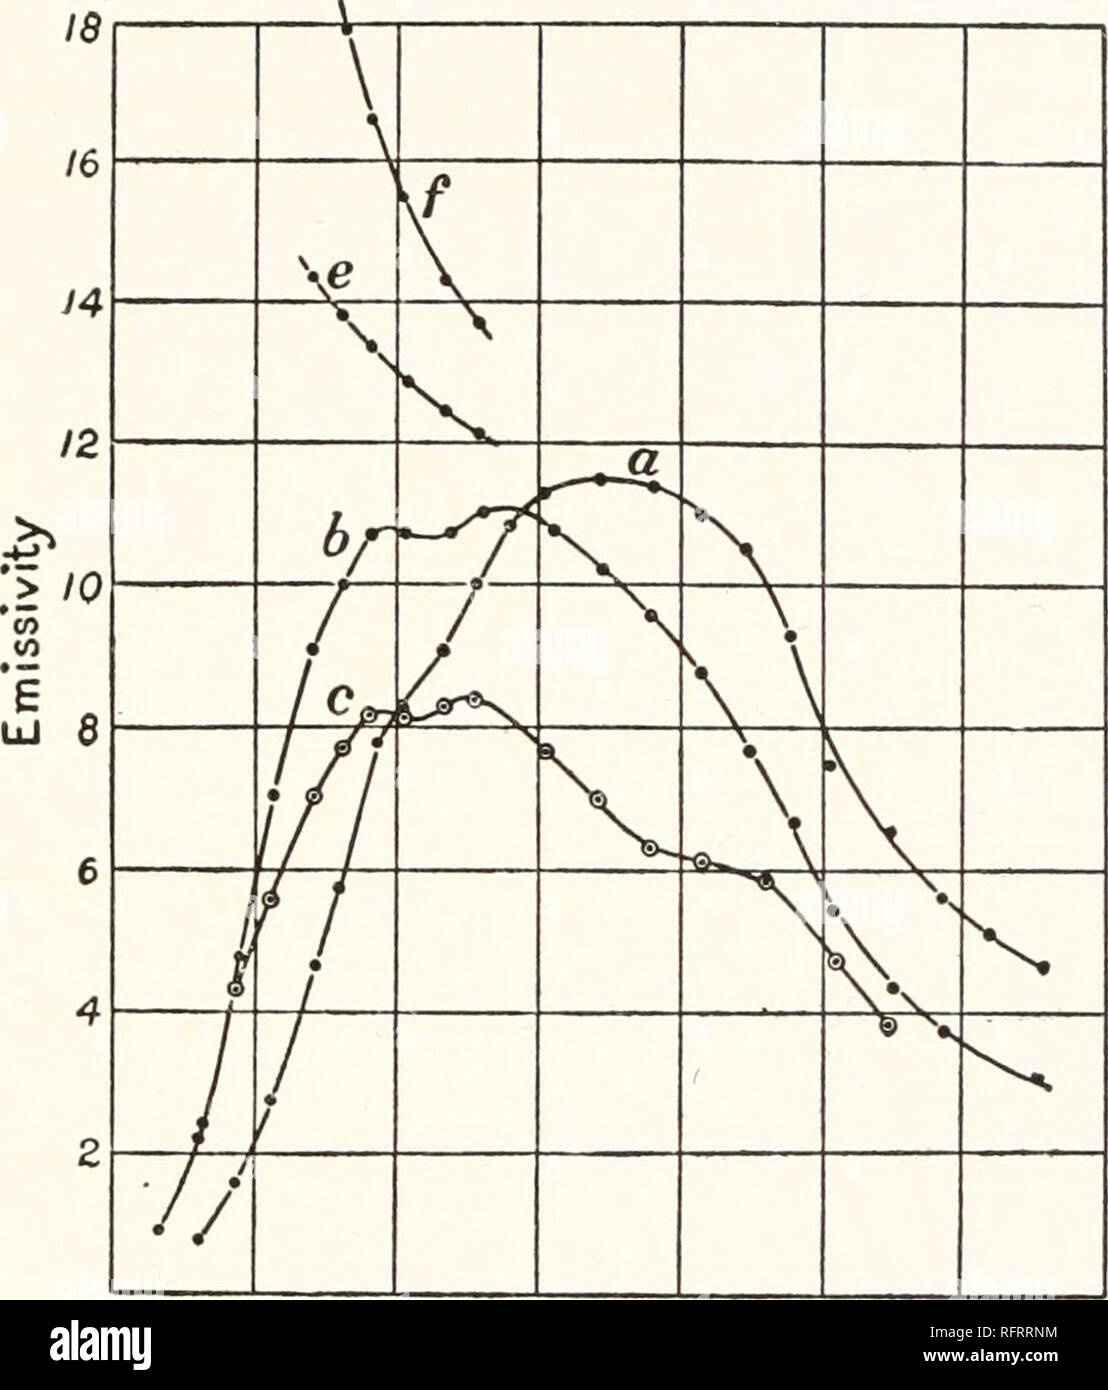 . Carnegie Institution of Washington publication. OXIDES. II9 from an unmelted surface. The depression at 3.3 // is marked, and at 5.5 ;«there is a possible emission band. The thickness of the layer was at least 1.2 mm. Curves e and/show the emission of a strip of platinum. No depression appears at ^ n, from which it would appear that the depression at 3.$ n is a characteristic of the oxides and not due to absorption in the instrument.. / 2 3 4 5 6 7 8JU Fig. 87. — Zinc oxide (a); Lead oxide (6), (c); Platinum. Iron Oxide (Fe203); Copper Oxide (CuO). (Curves a and b, Fe203; curves c, d e, CuO; Stock Photo